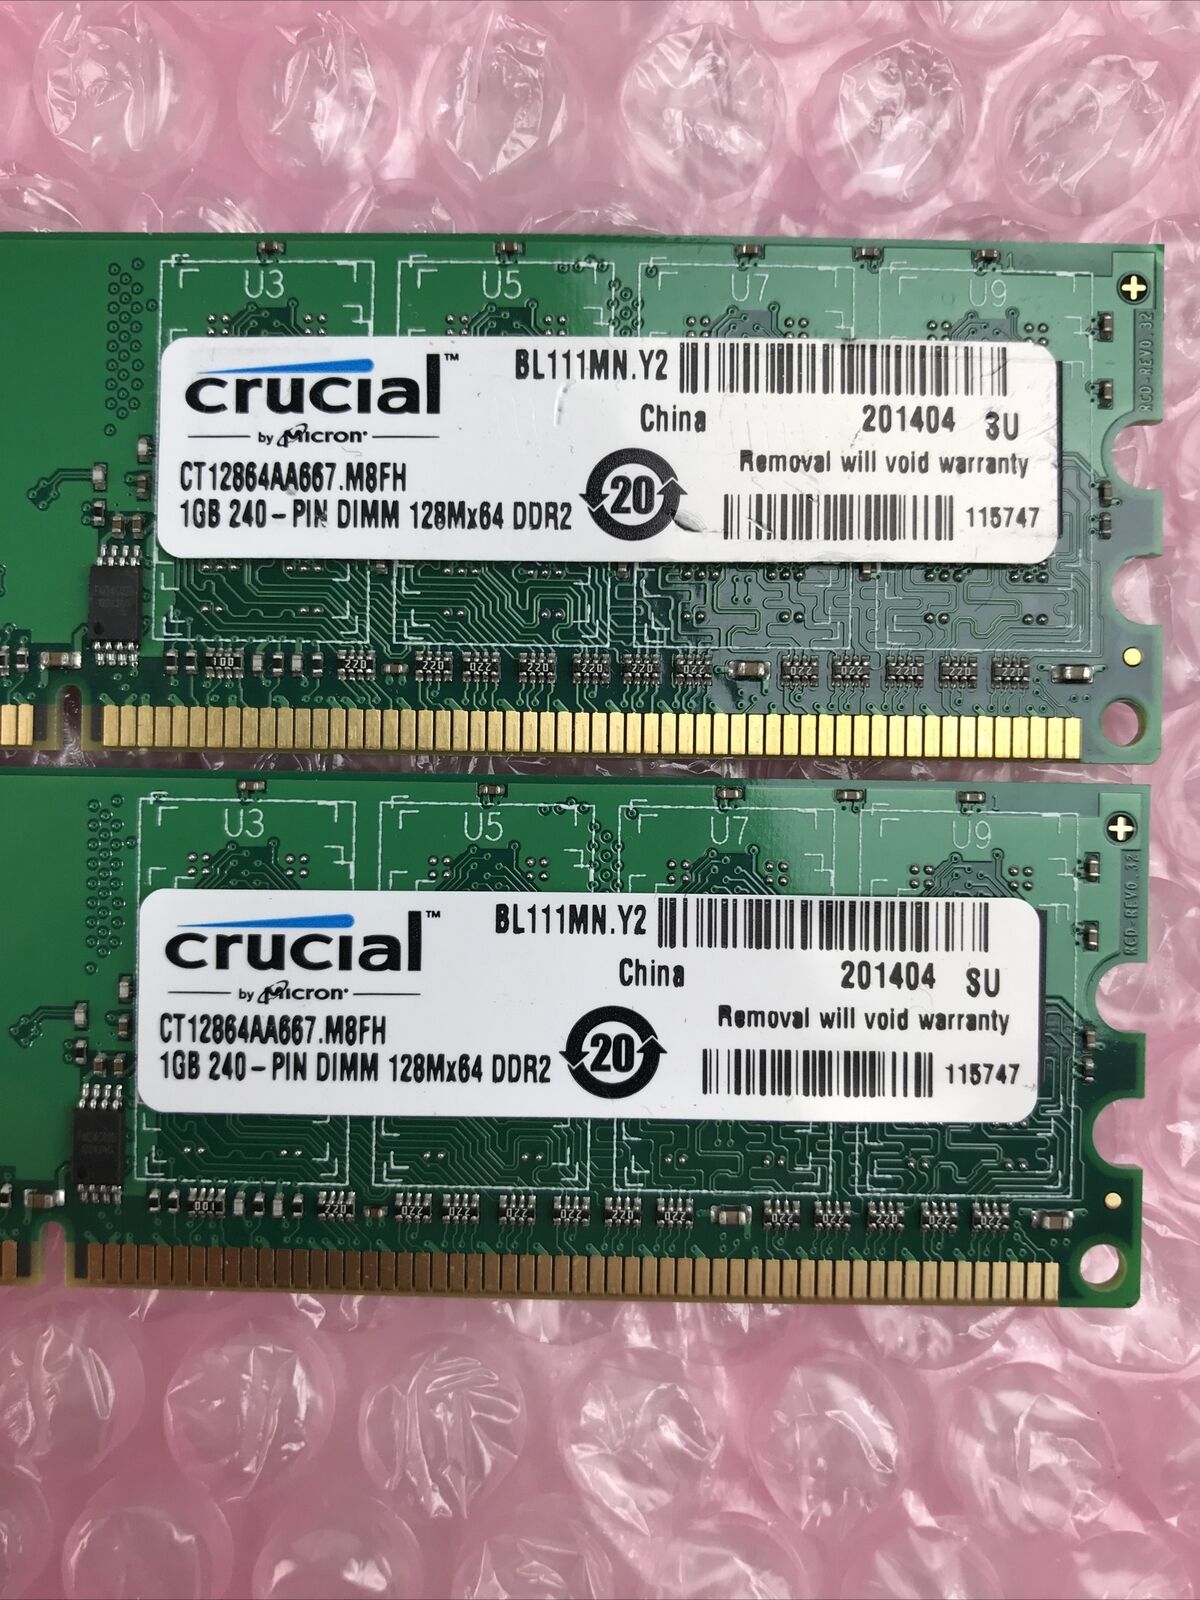 Lot of 2 Crucial 1GB 240 128Mx64 DDR2 DIMM CT12864AA667.M8FH